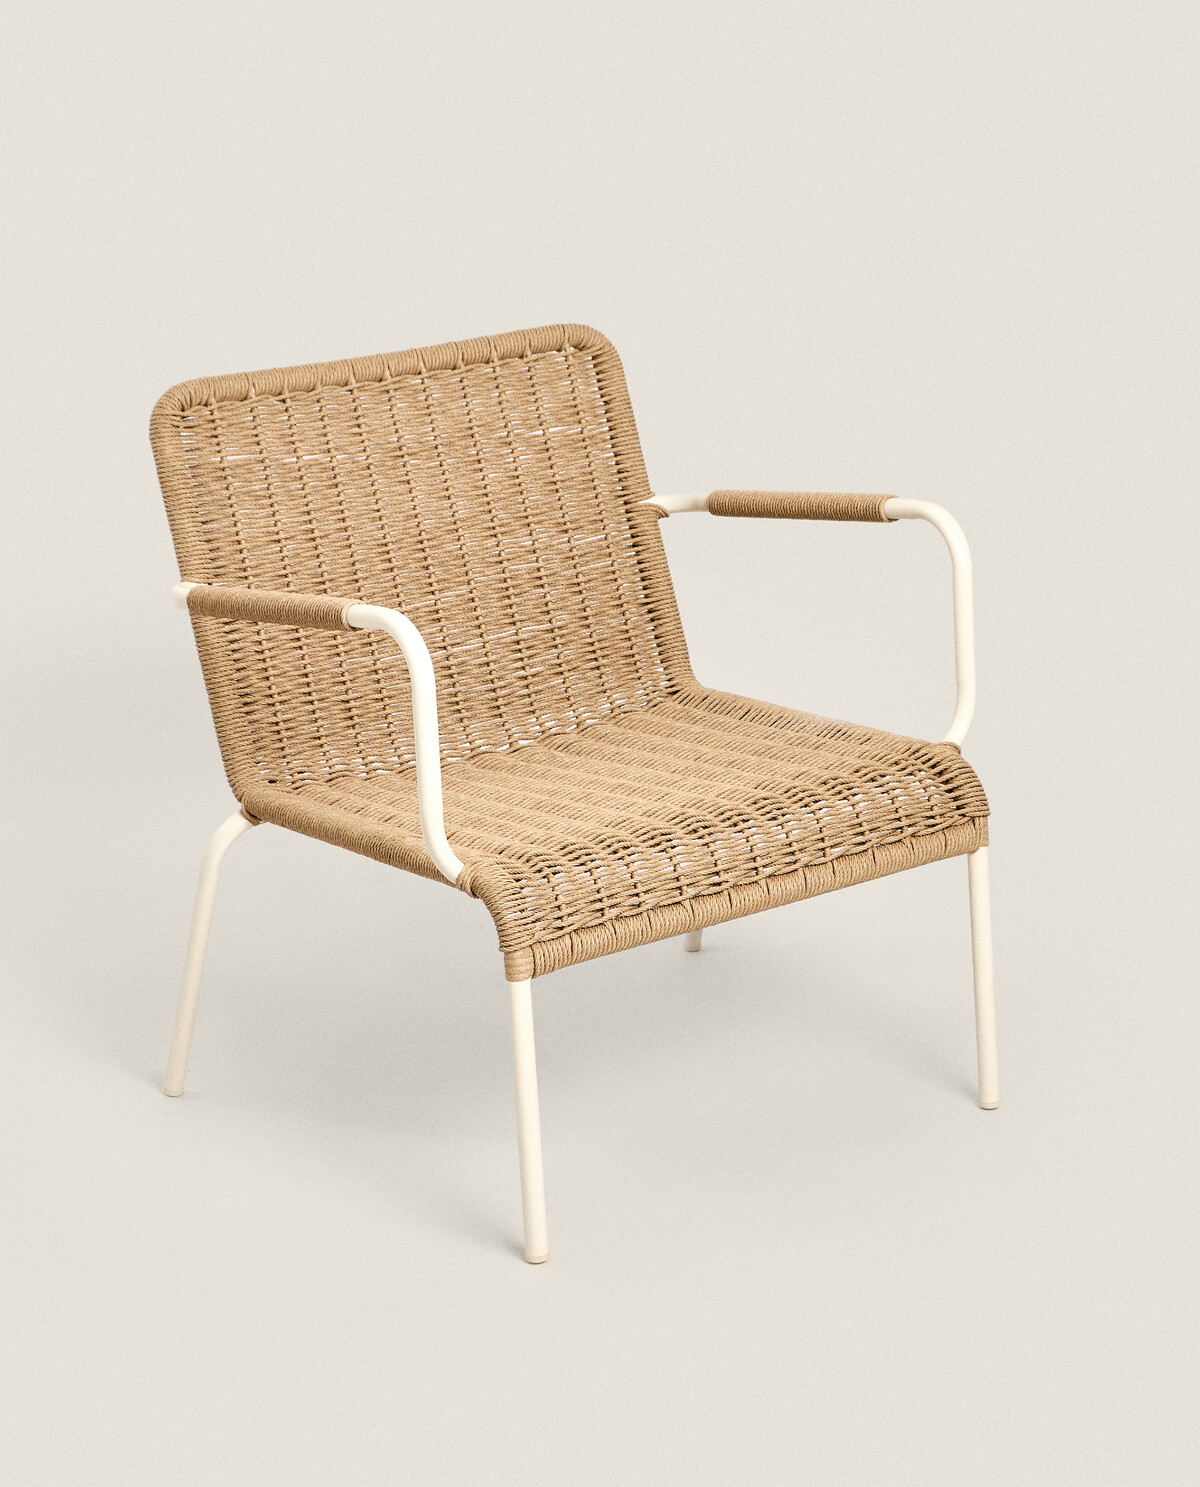 WOVEN OUTDOOR CHAIR WITH ARMRESTS | Zara Home United States of America